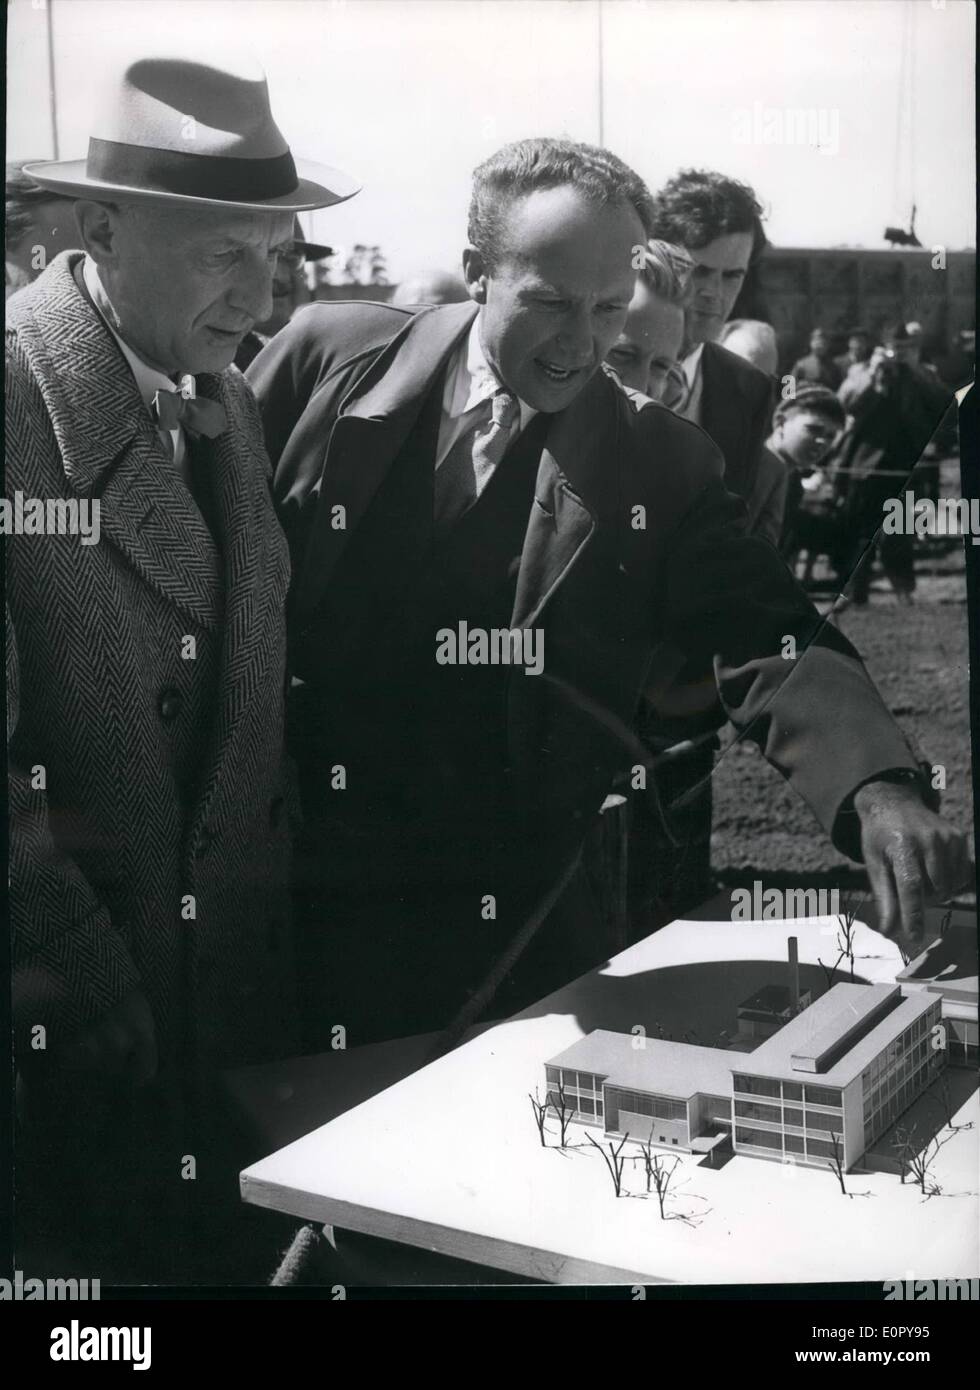 May 05, 1957 - Groundbreaking for Berlin's Atomic Reactor. On May 25, 1957, the mayor of Berlin, Dr. Otto Suhr, performed the ground breaking for the Institute for Atomic Research of Berlin. The institute will take up 90,000 square meters on Wannsee and cost 14,200,000D Stock Photo